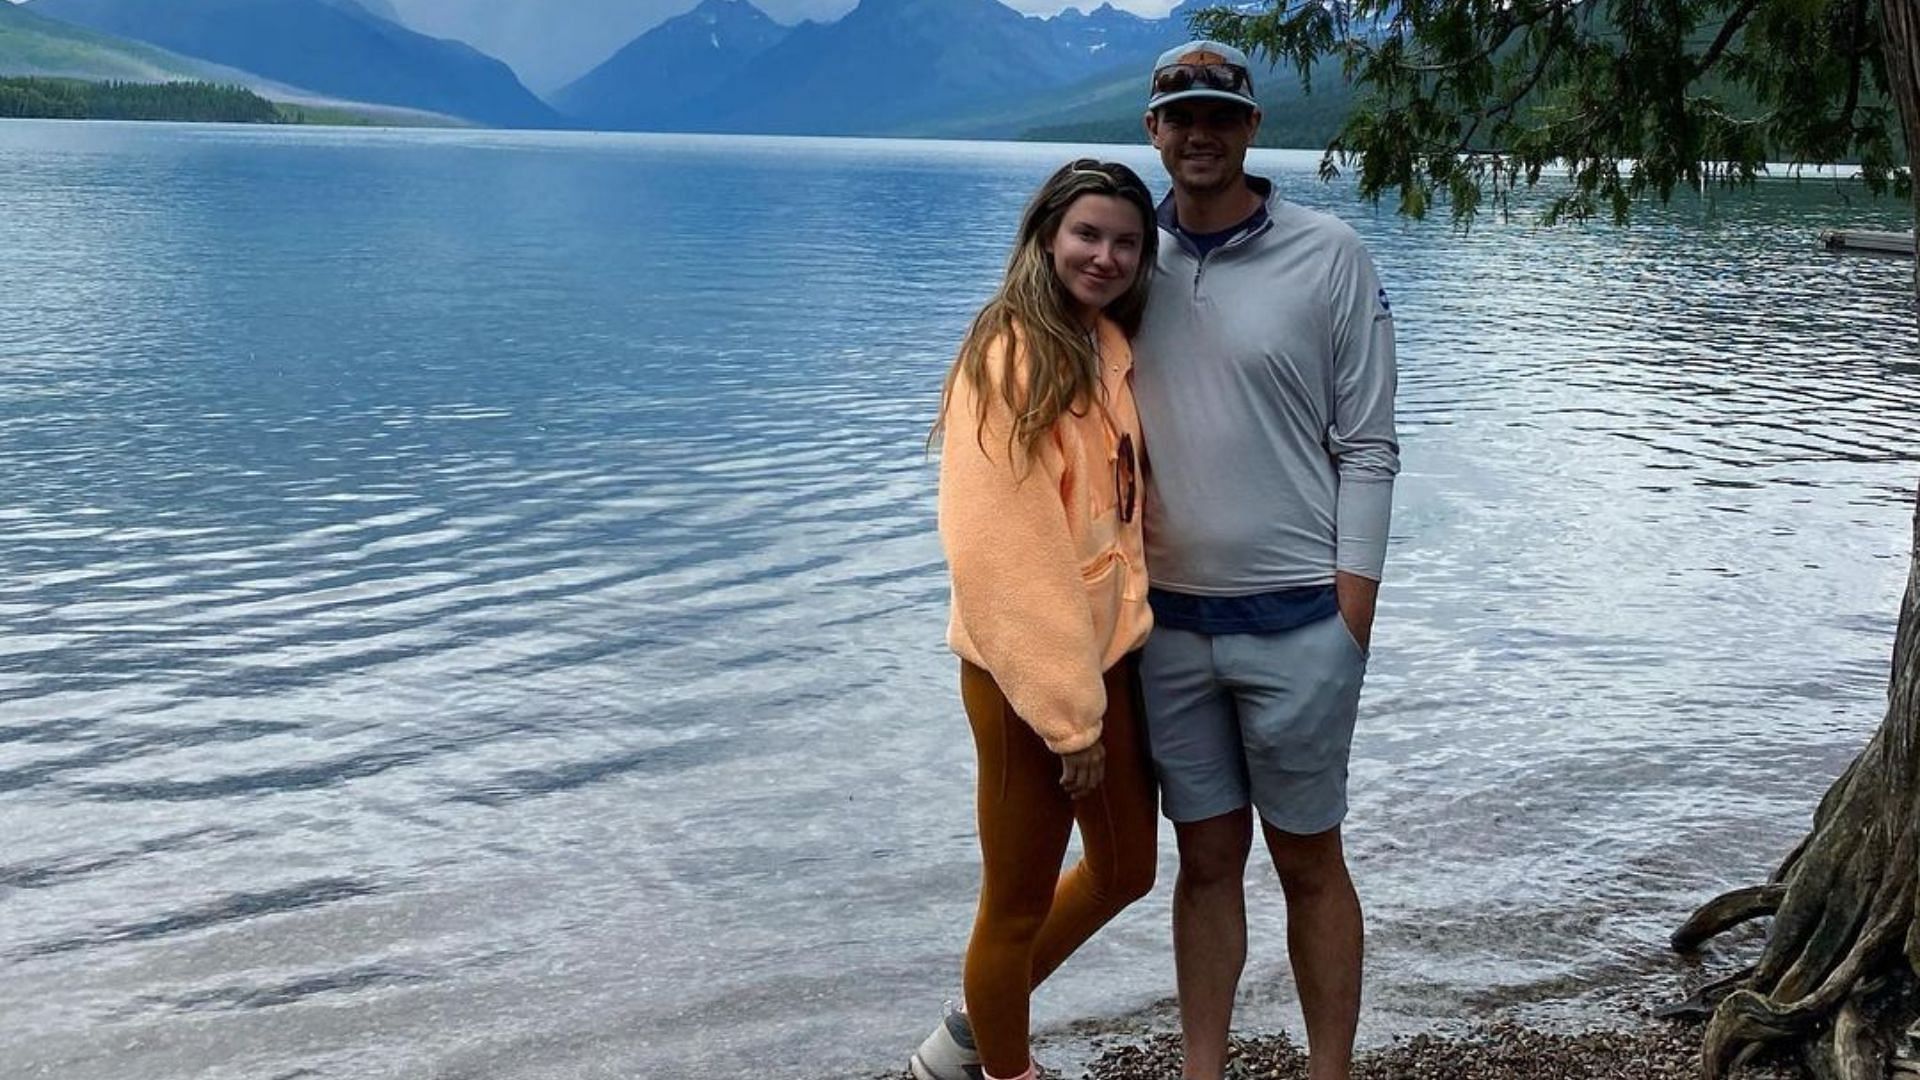 Who is Beau Hossler&rsquo;s girlfriend Ashley Haight? 5 things to know about the pair (Image via Ashley Haight Instagram)